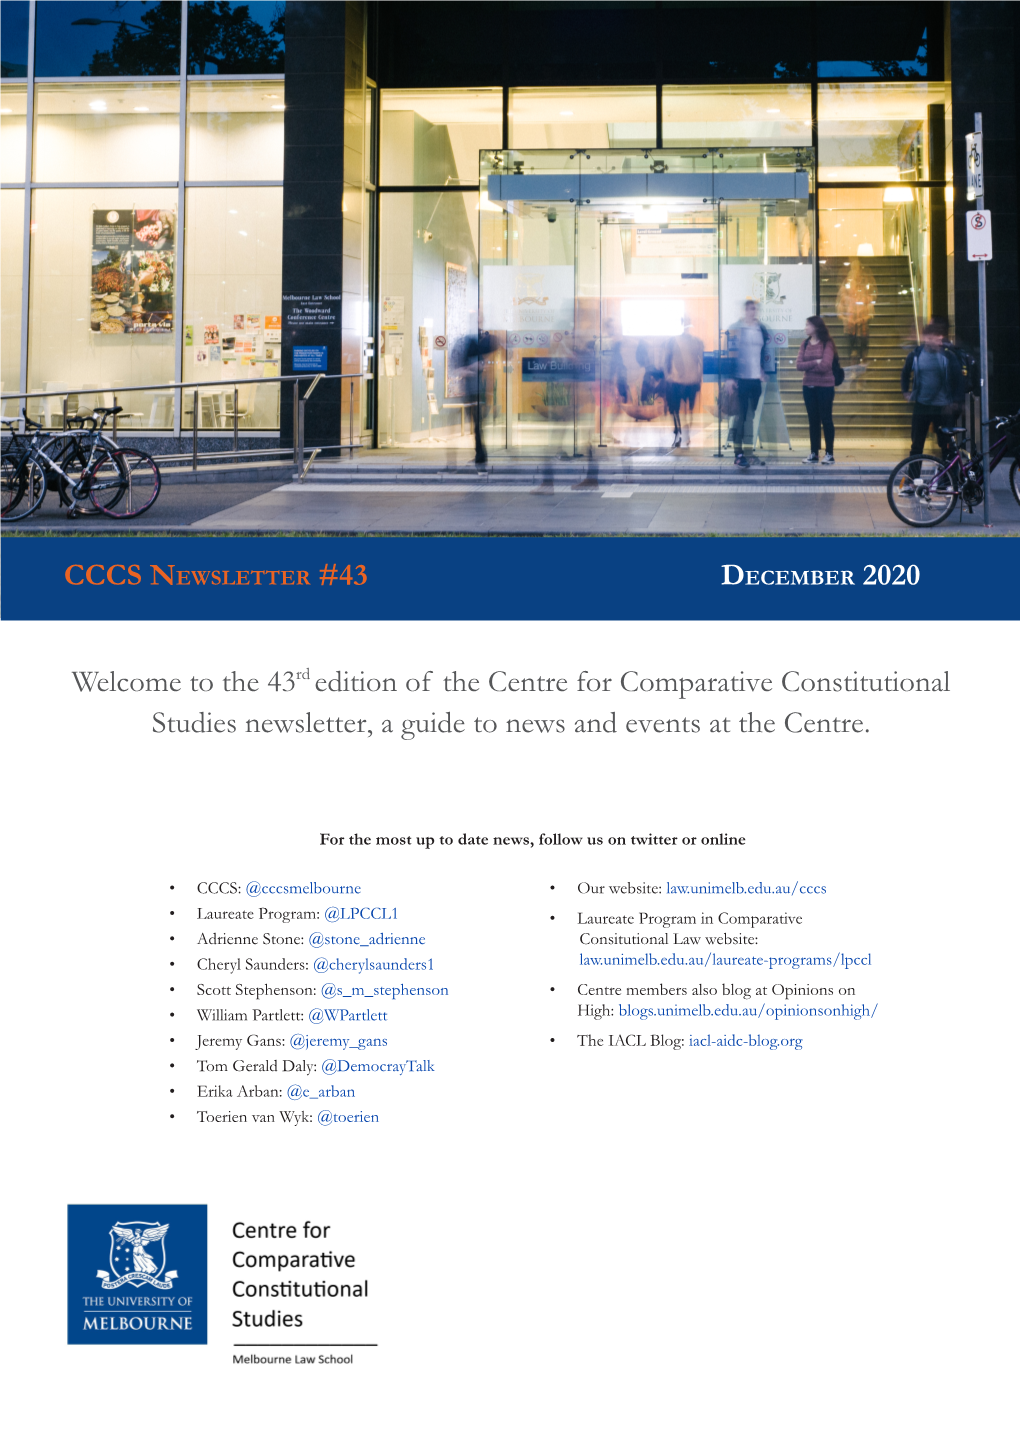 Welcome to the 43Rd Edition of the Centre for Comparative Constitutional Studies Newsletter, a Guide to News and Events at the Centre